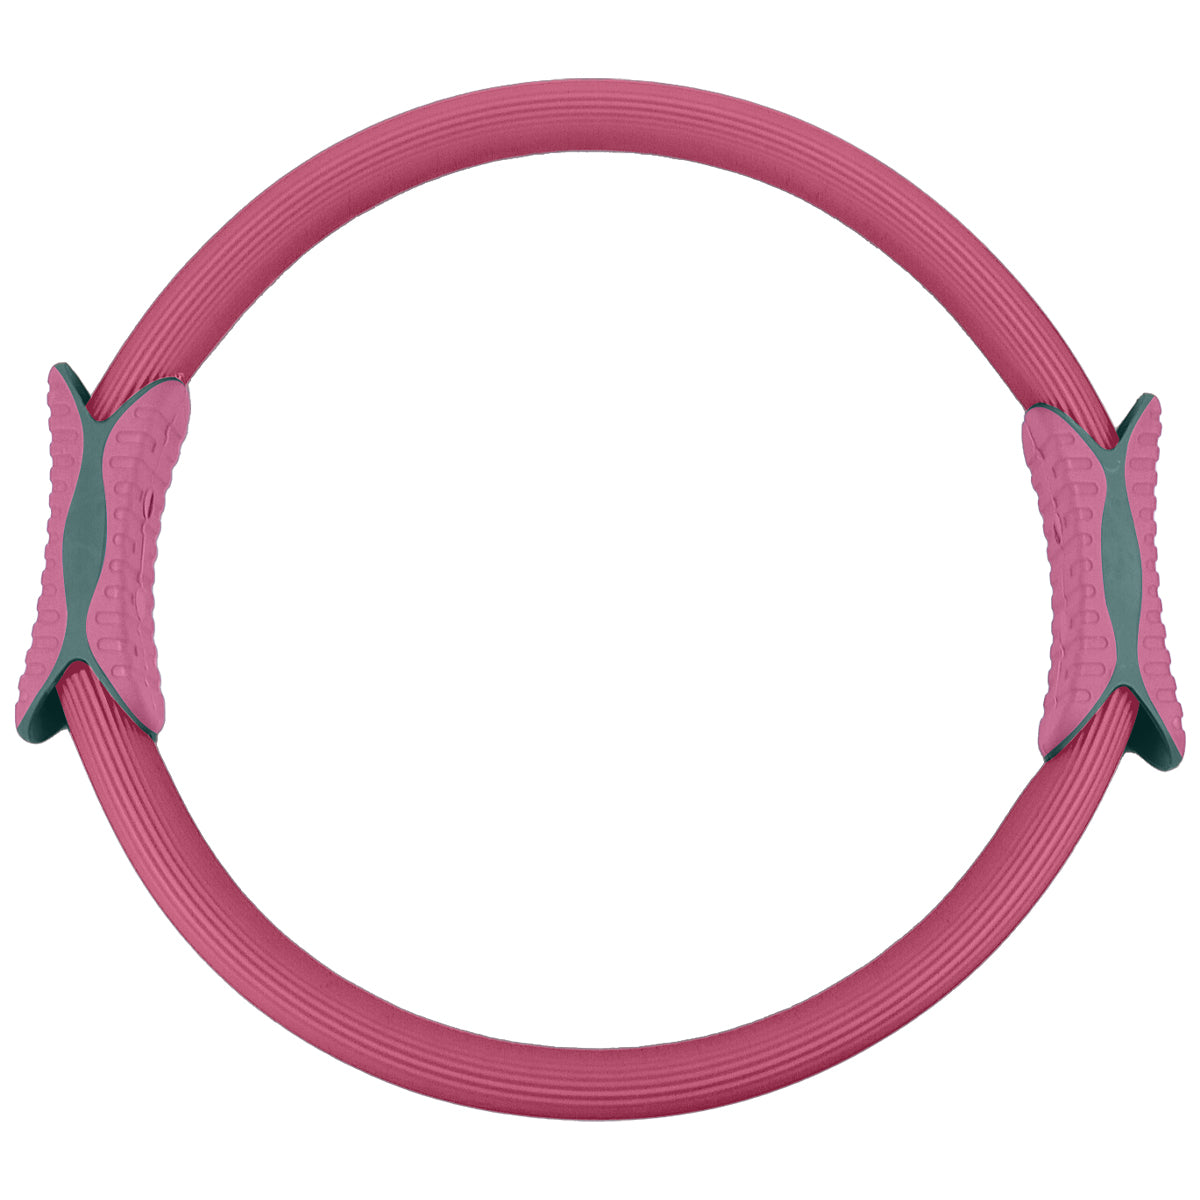 Versatile Pink Pilates Ring and Yoga Exercise Band for Home Workouts